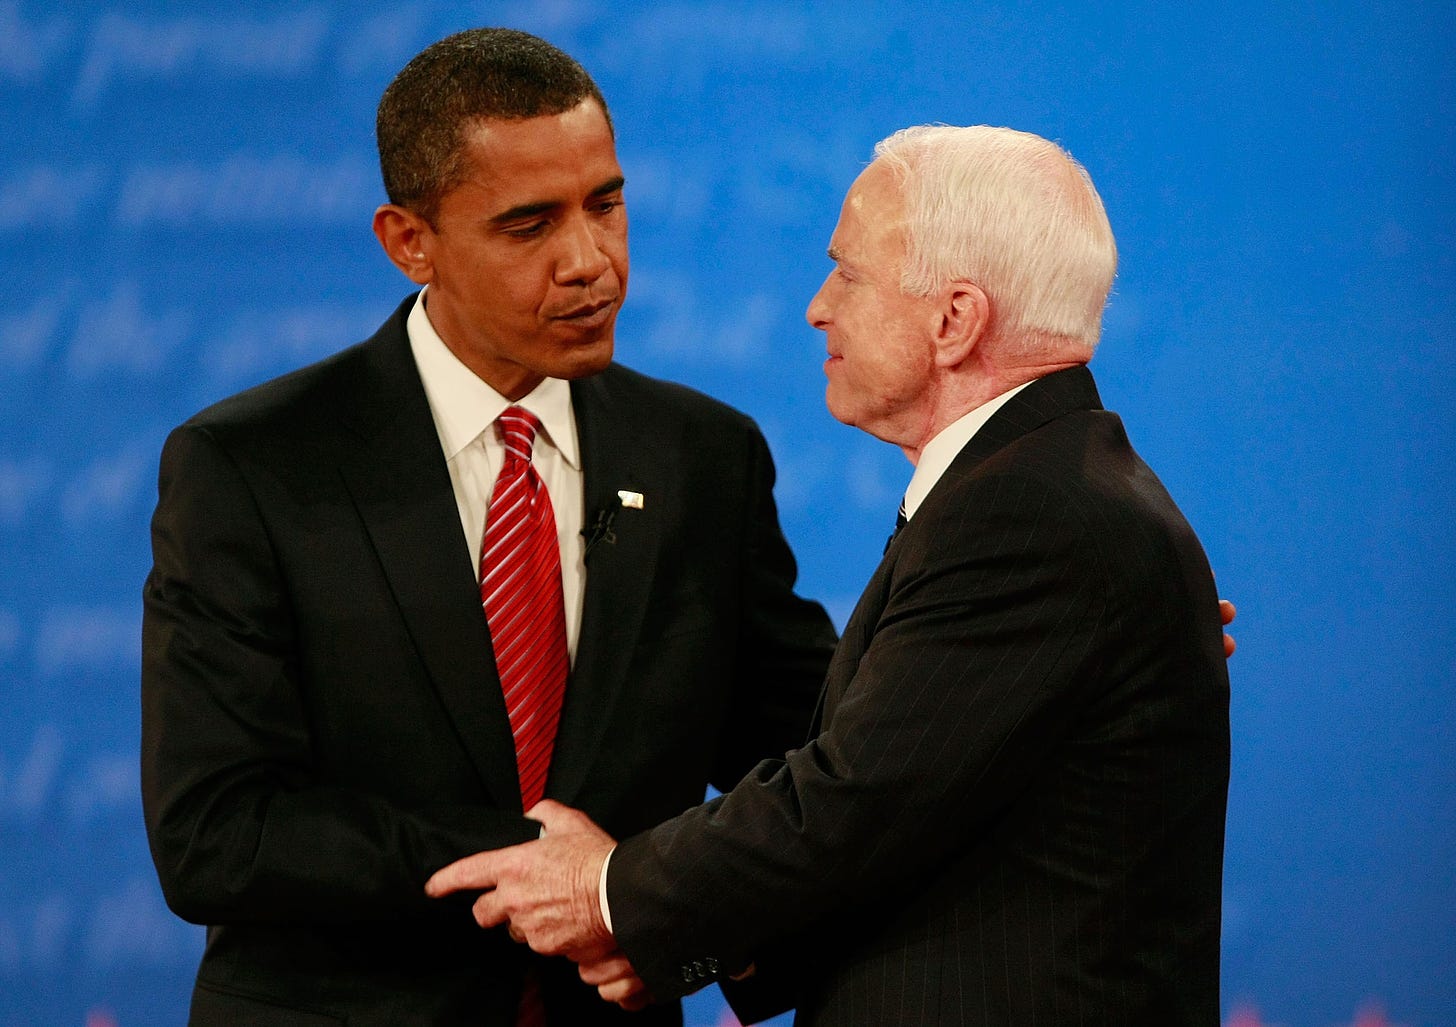 Barack Obama pays touching tribute to former political opponent John McCain